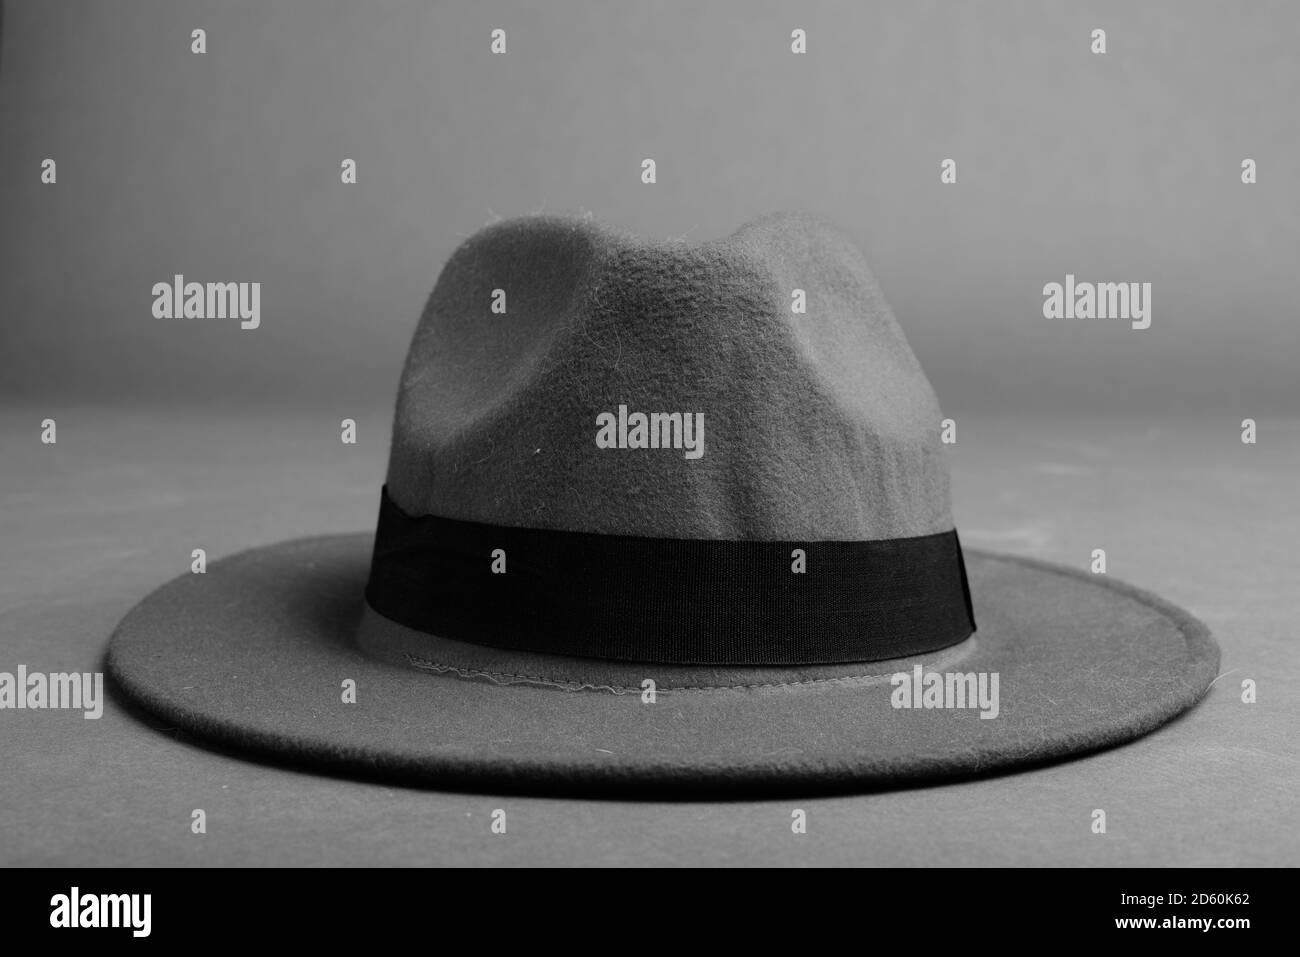 Fedora Hat Against Gray Background In Black And White Stock Photo